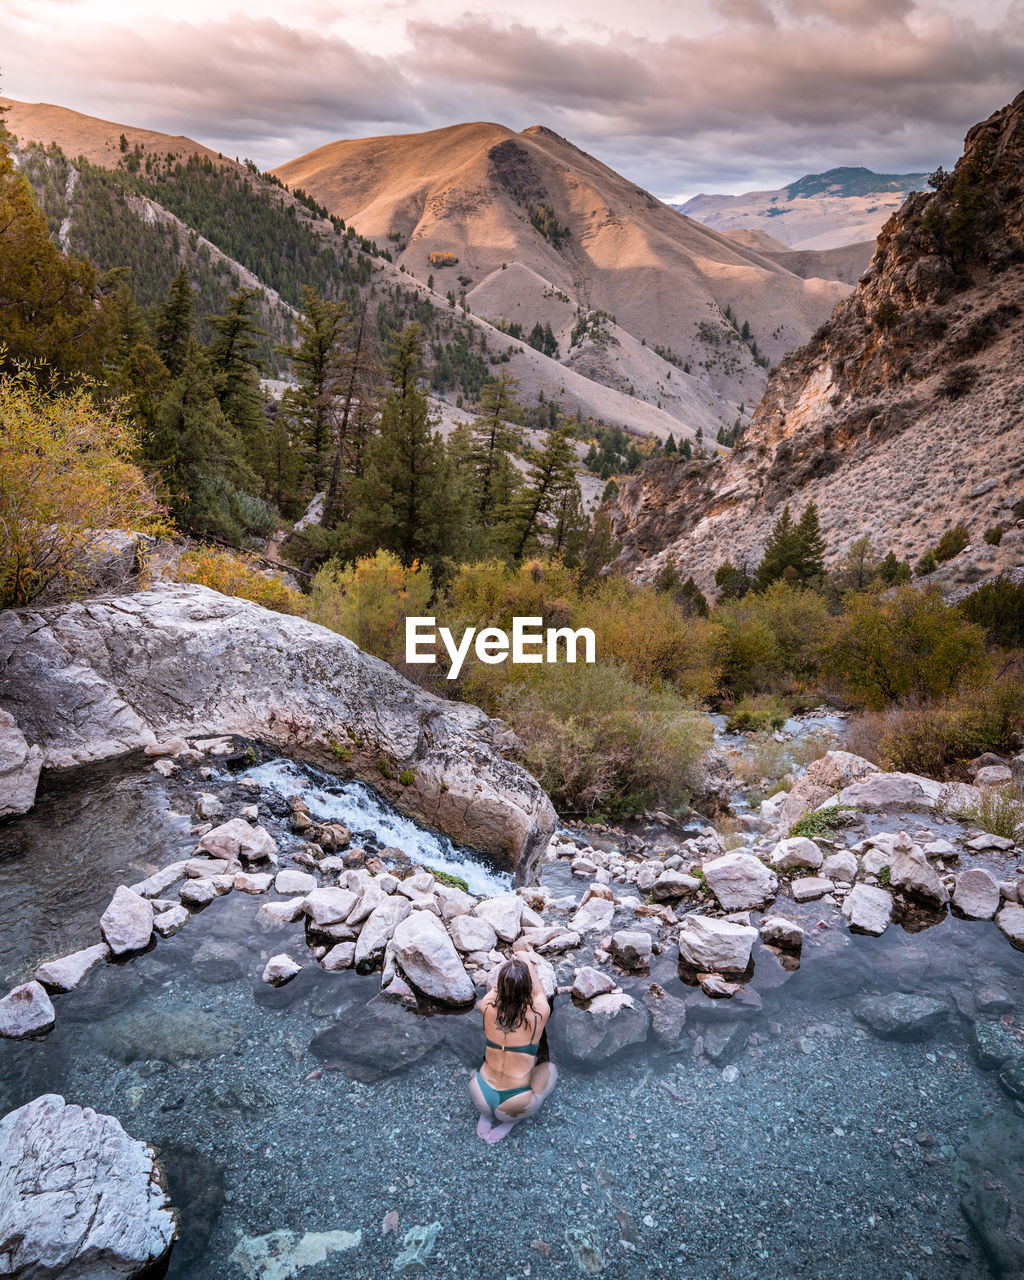 Woman in hot spring pools in mountains with a view